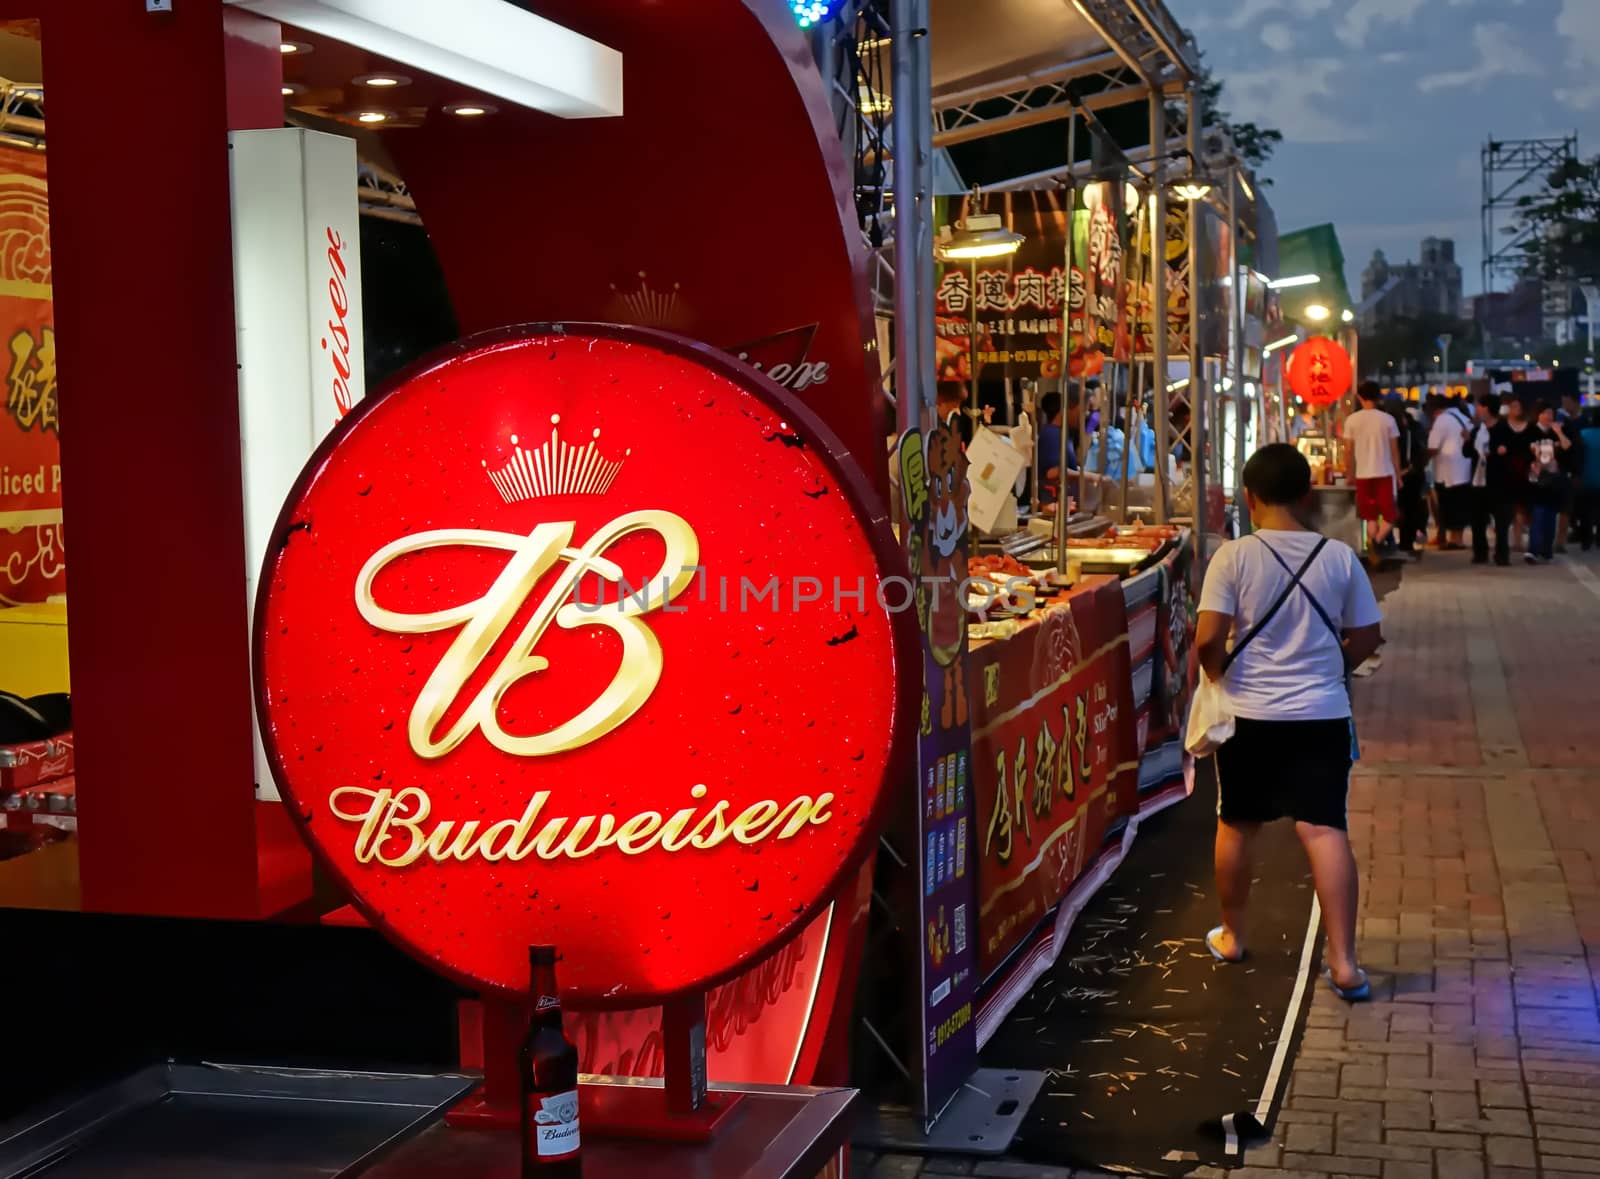 KAOHSIUNG, TAIWAN -- MARCH 2, 2018: An outdoor vendor at a night market sells grilled meat and Budweiser beer.
